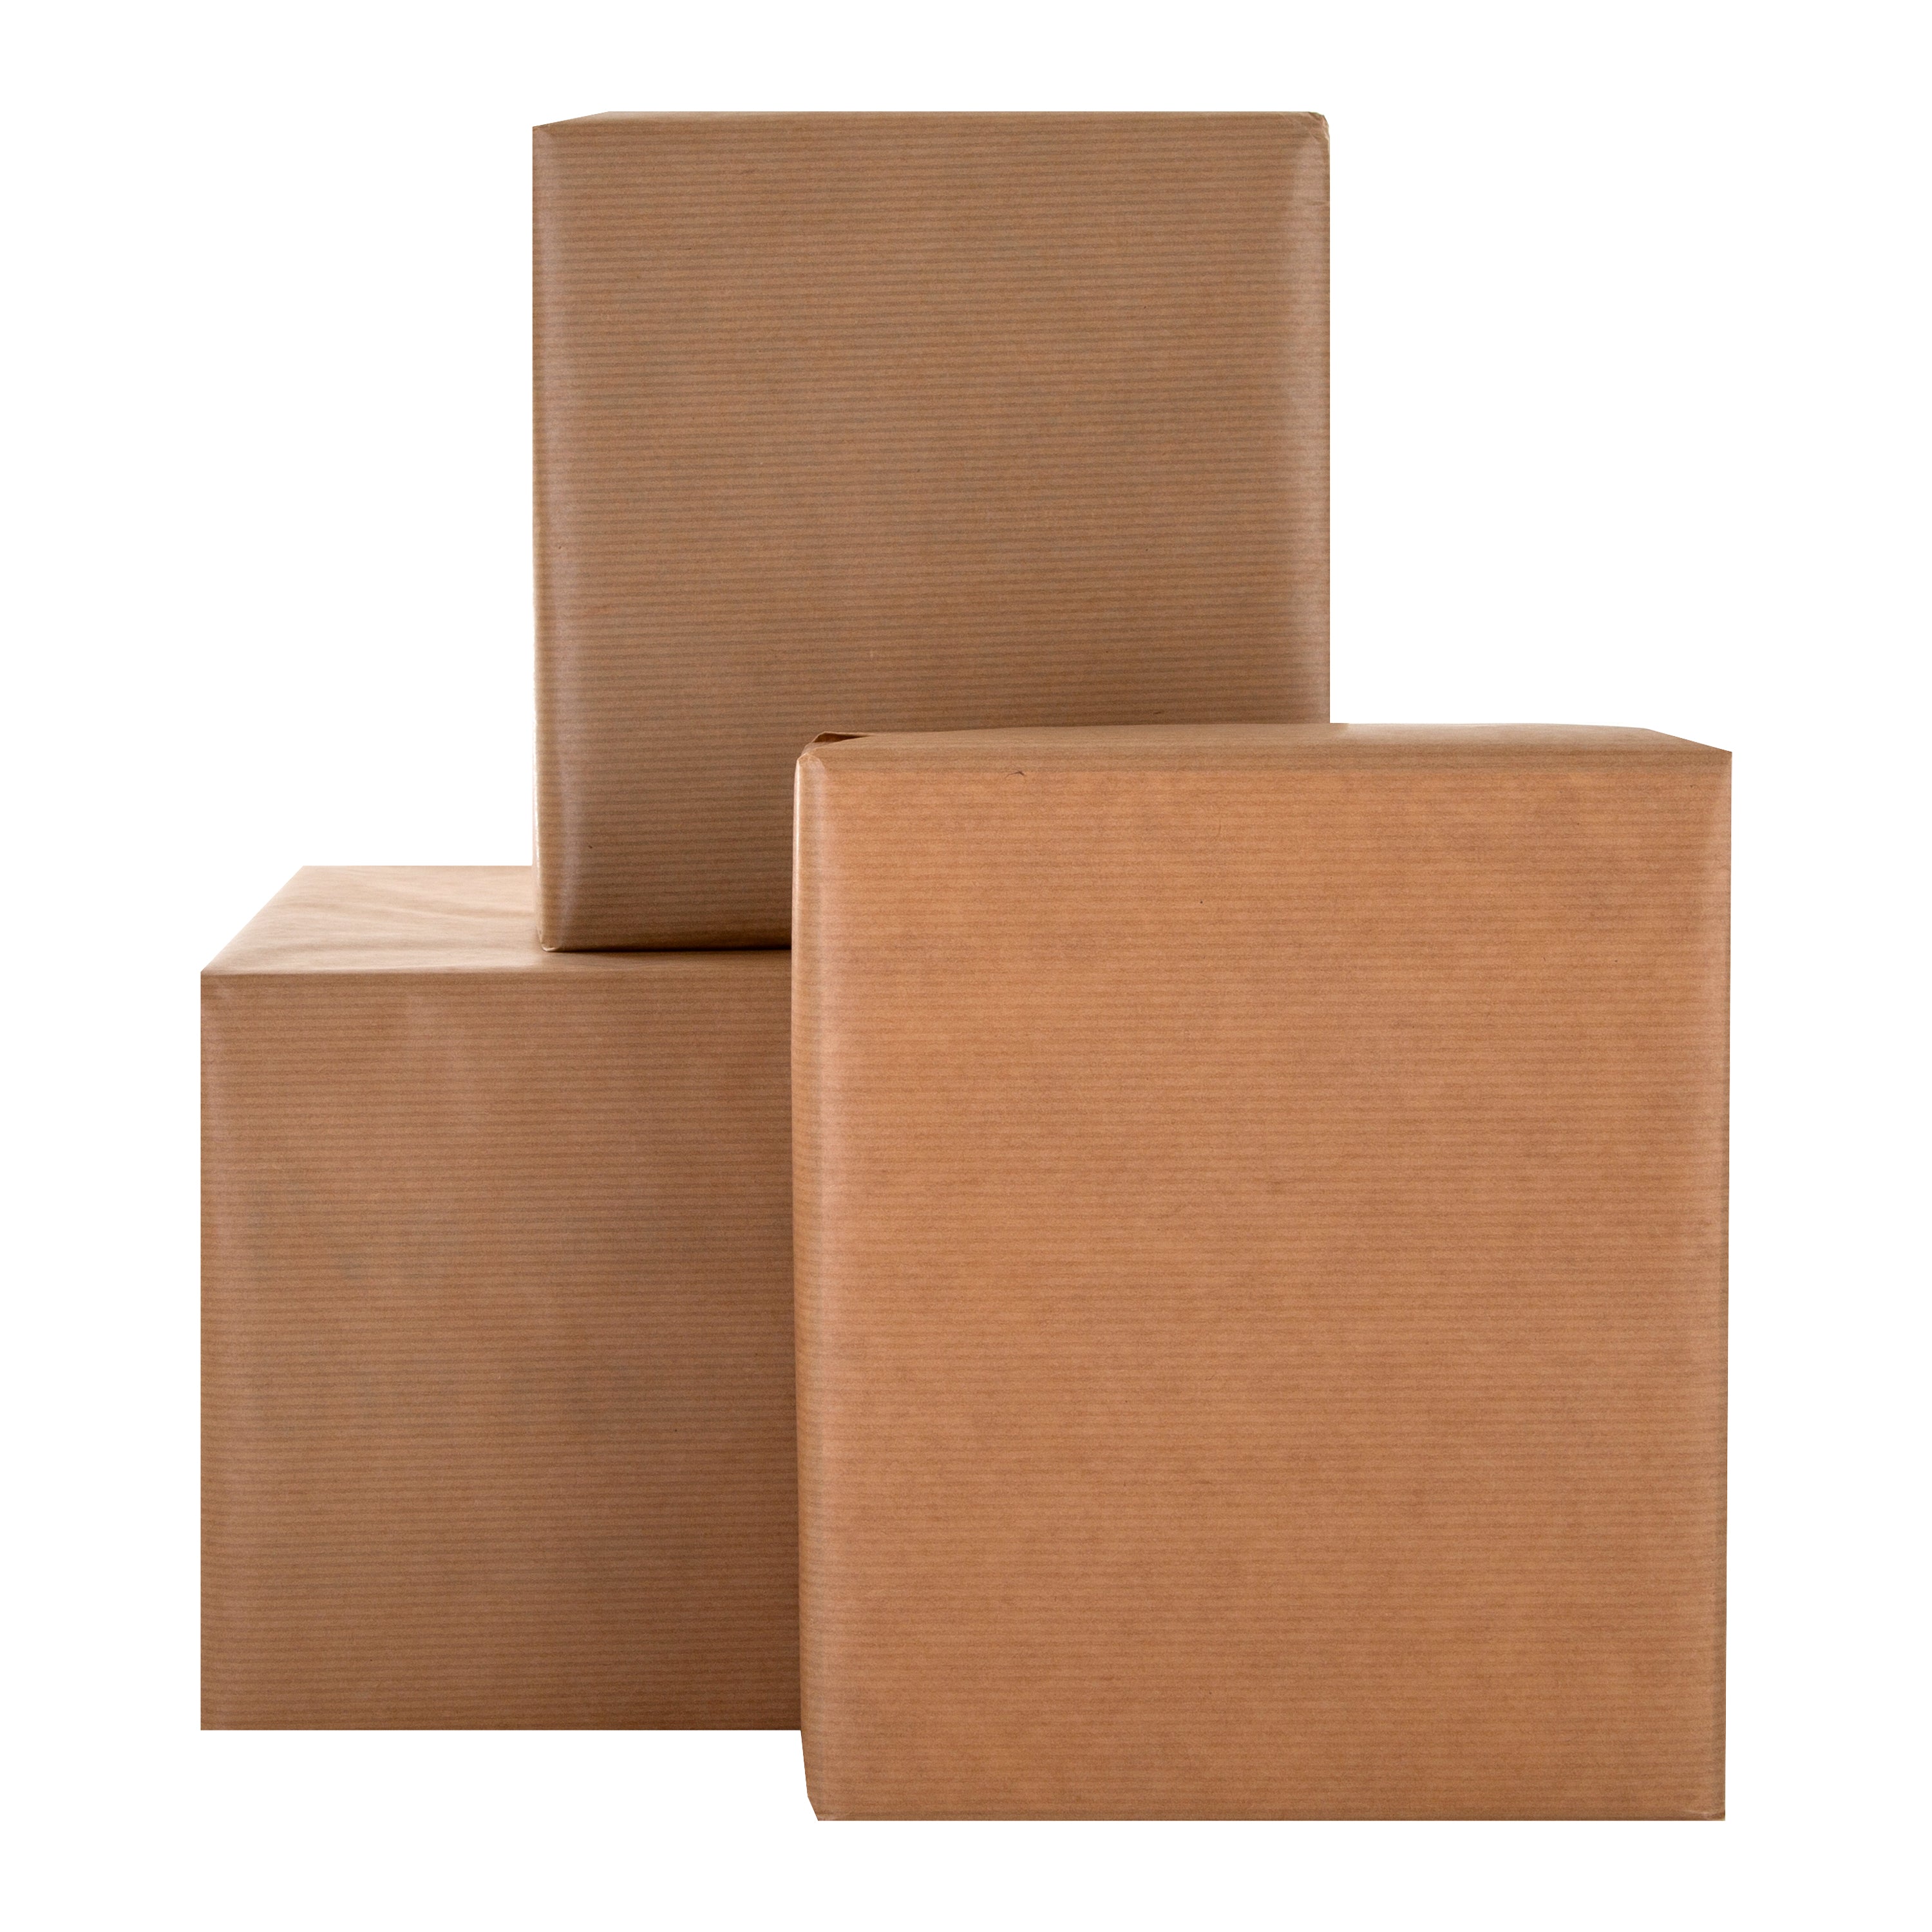 10M Recyclable Plain Brown Kraft Wrapping Paper Roll – Hallmark